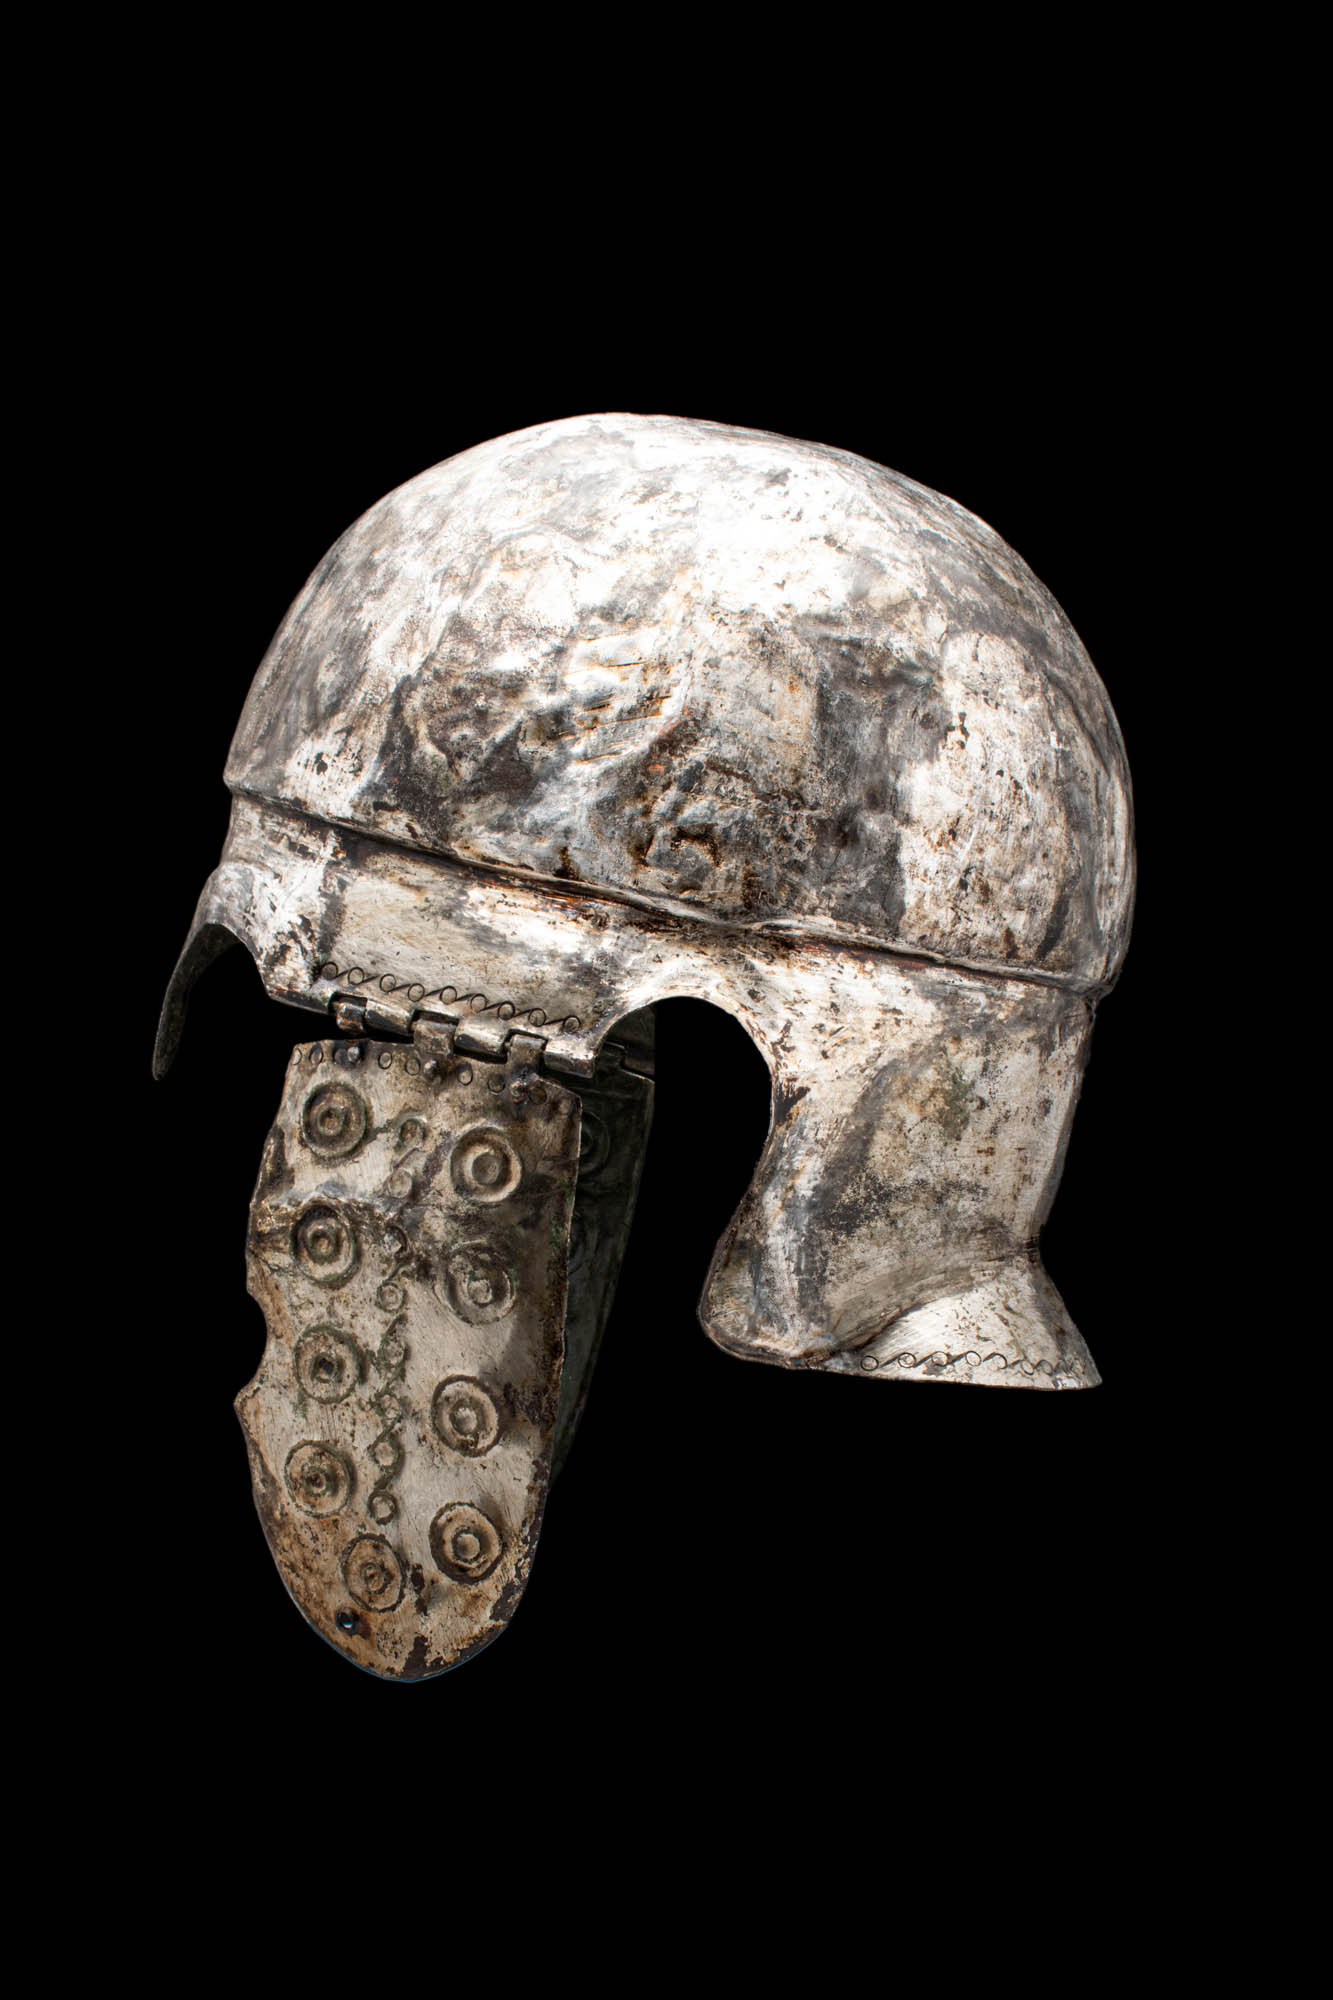 STUNNING COMPLETE CHALCIDIAN HELMET WITH DECORATED CHEEKPIECES - Image 3 of 6